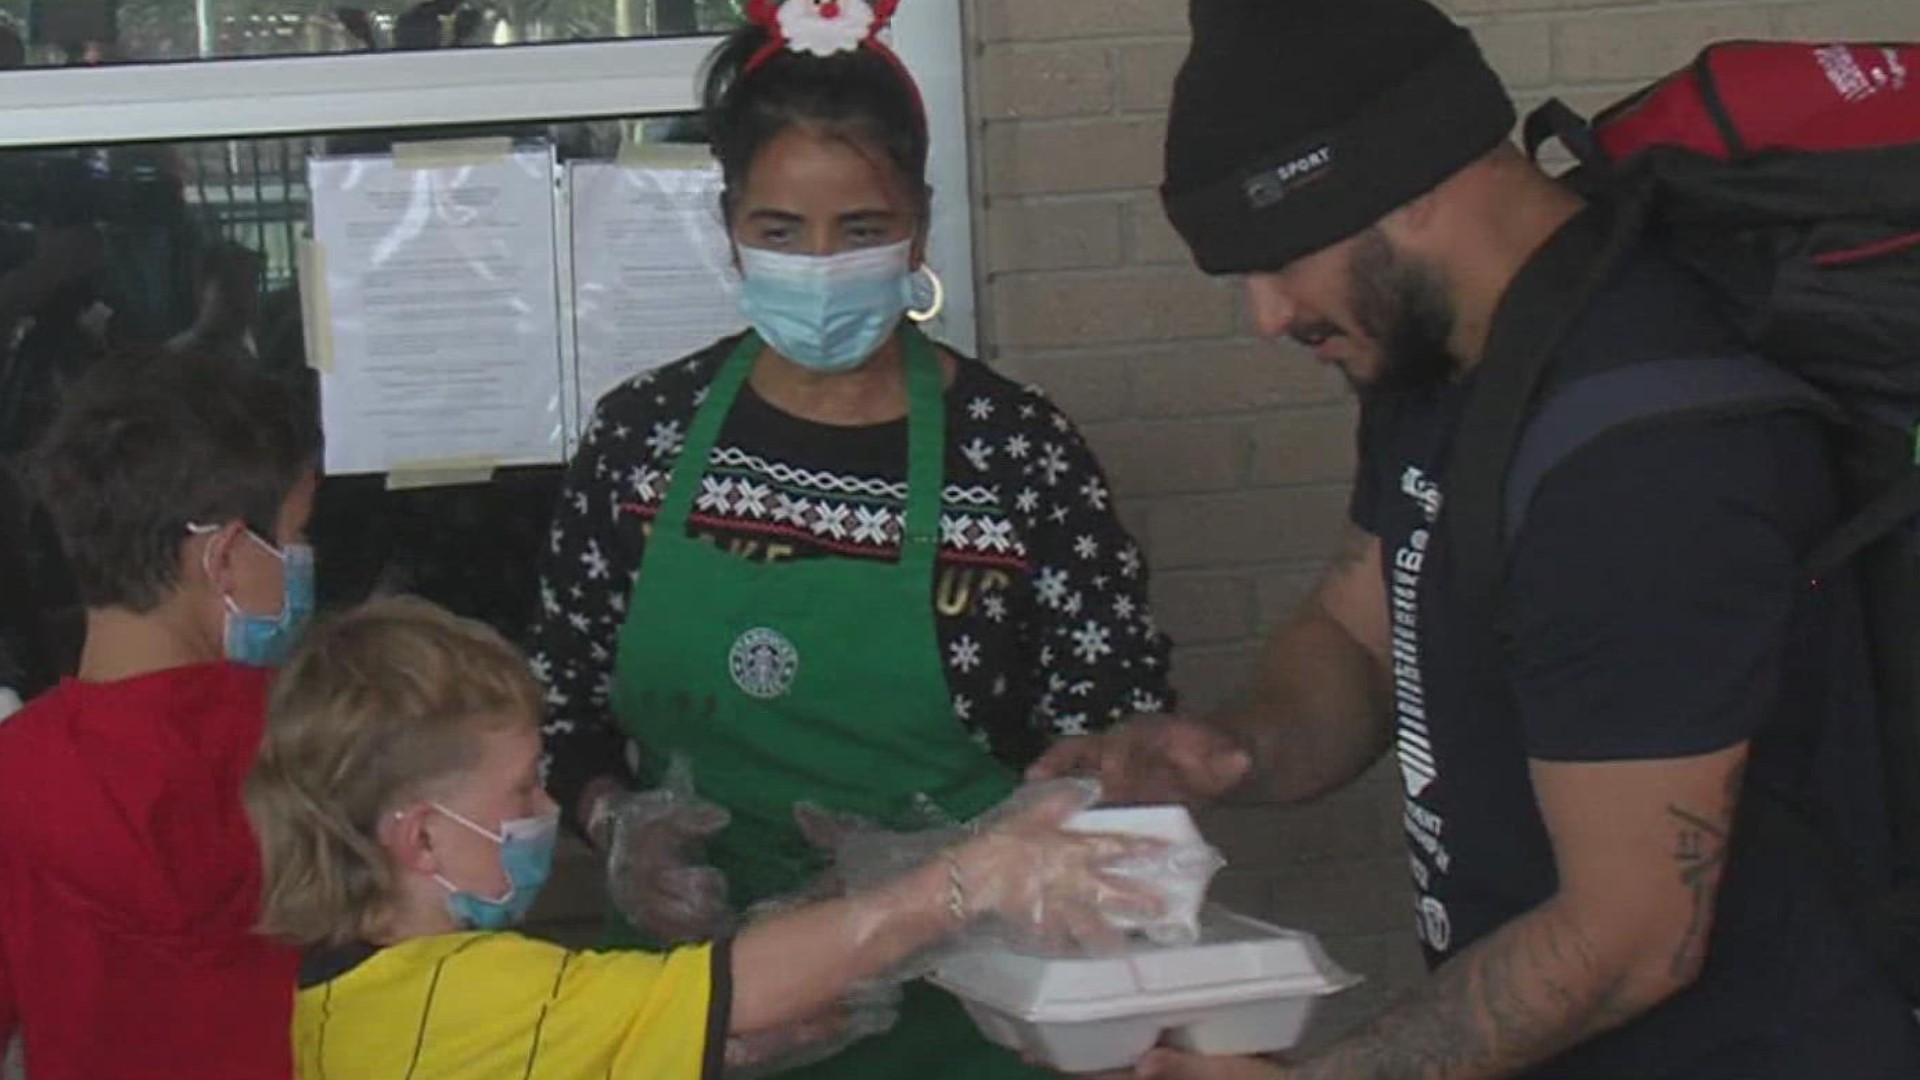 With a holy mass and a hearty meal for the unhoused people of Corpus Christi, this shelter brings some cheer to those in need this holiday season.